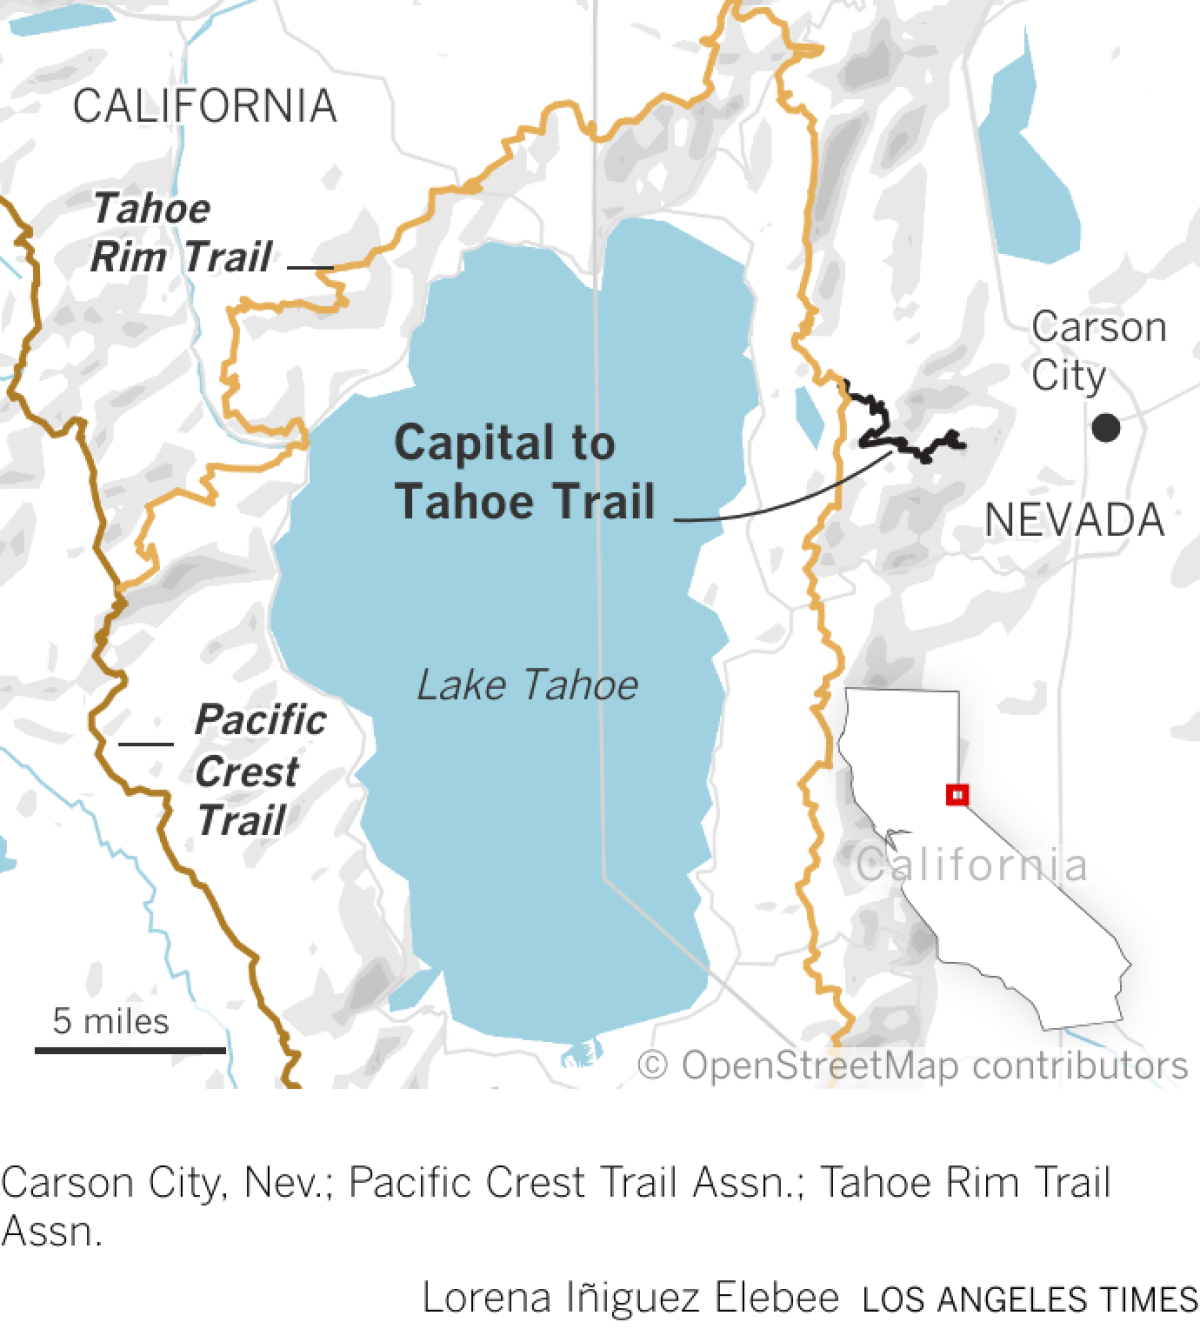 Map showing the Capital-to-Tahoe Trail connecting to Tahoe Rim Trail that borders Lake Tahoe.